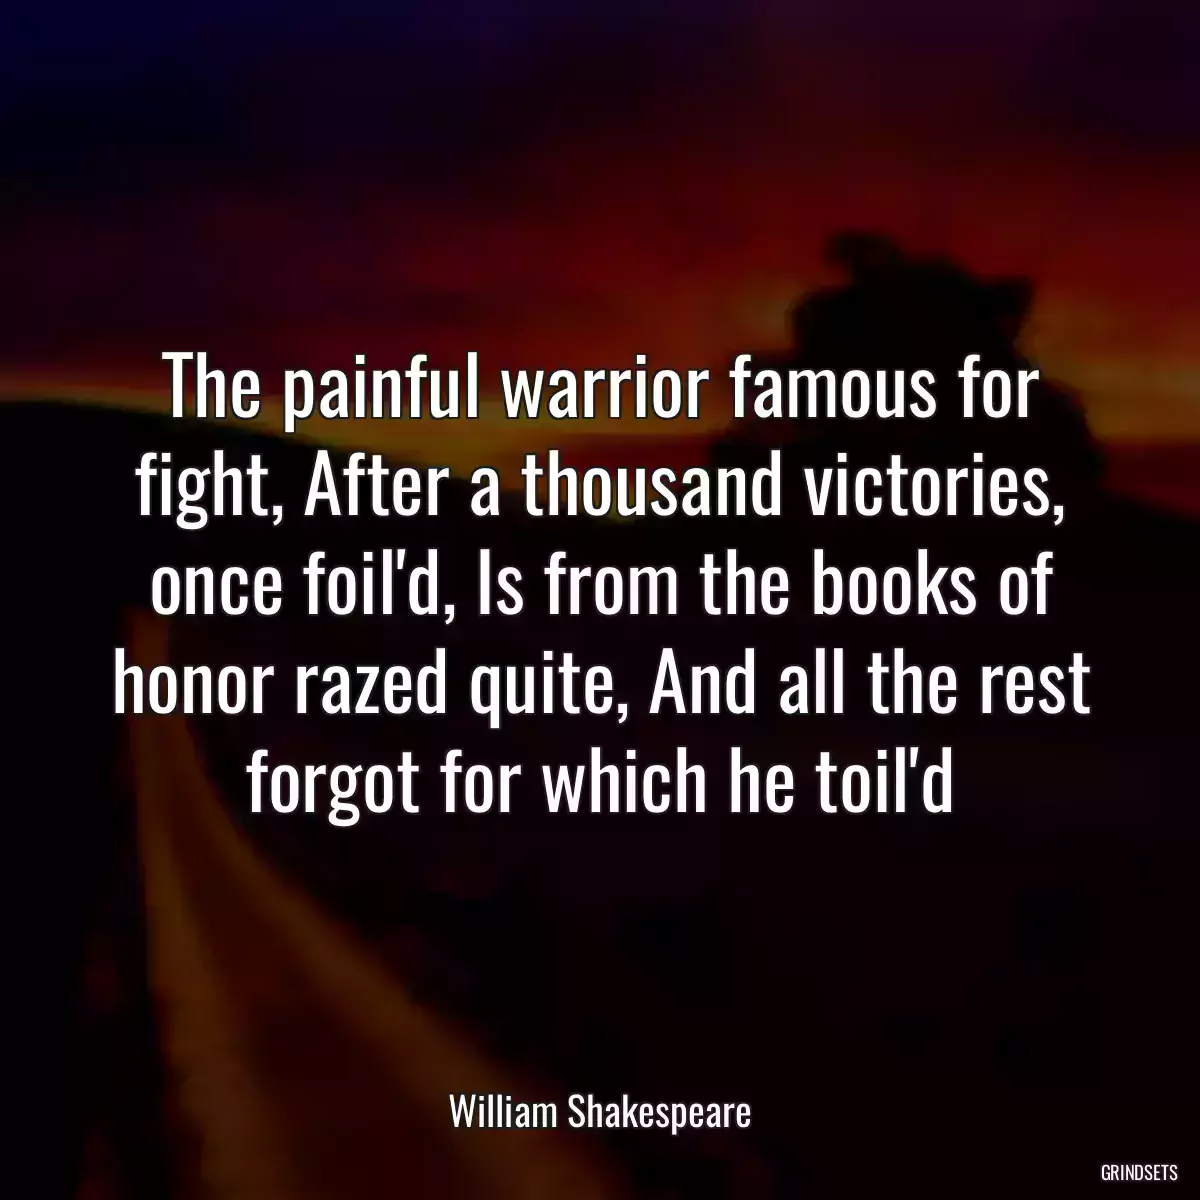 The painful warrior famous for fight, After a thousand victories, once foil\'d, Is from the books of honor razed quite, And all the rest forgot for which he toil\'d